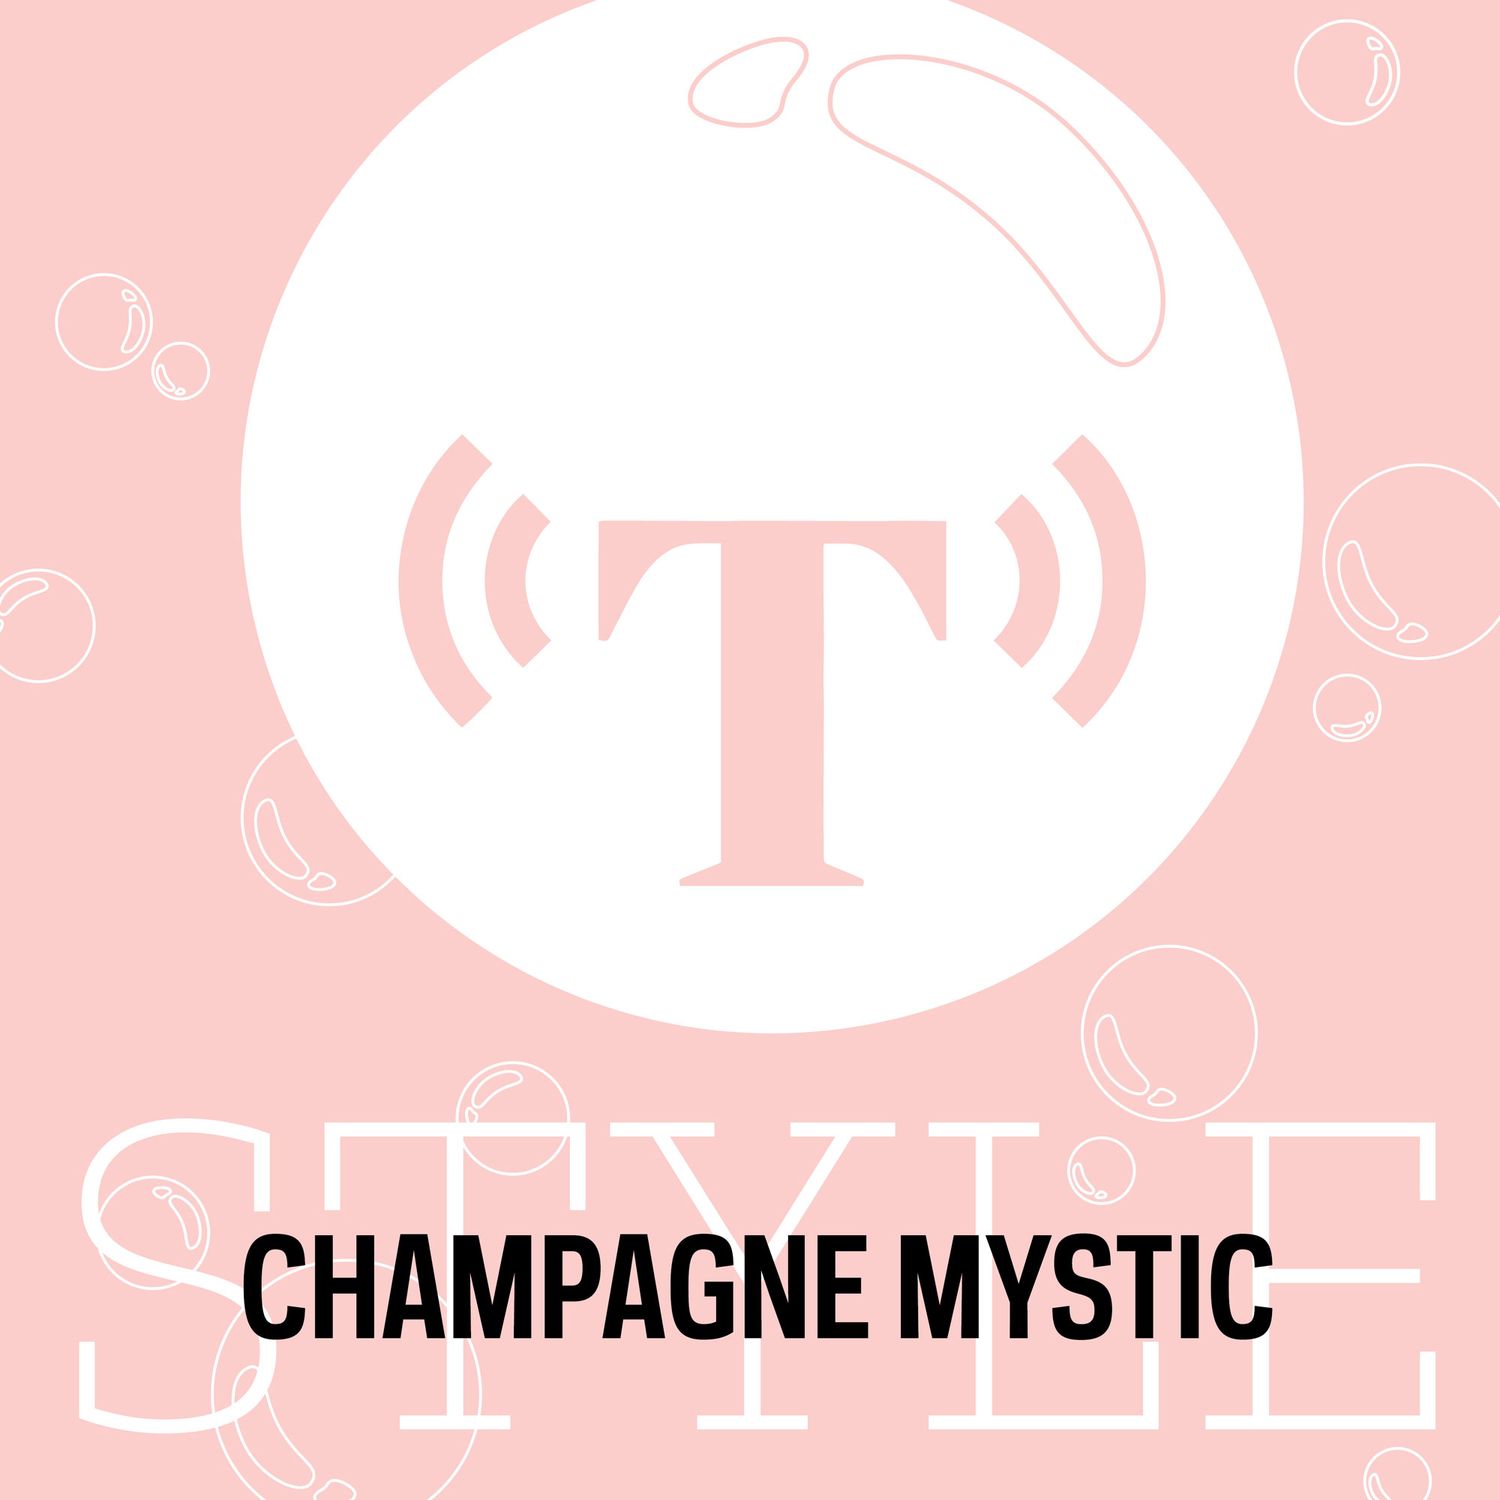 The Champagne Mystic